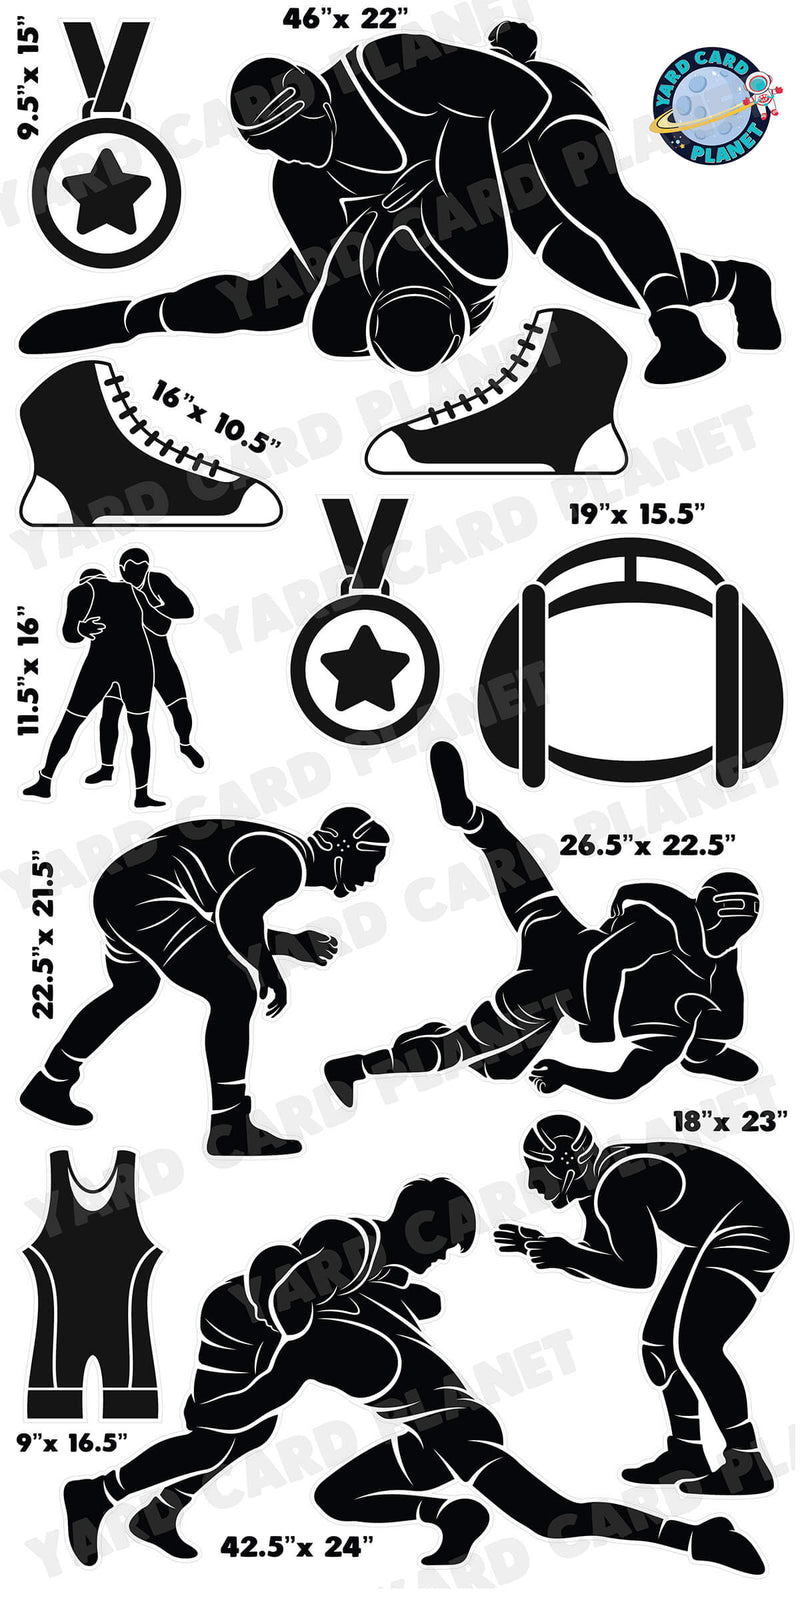 Wrestling Silhouette Yard Card Flair Set with Measurements